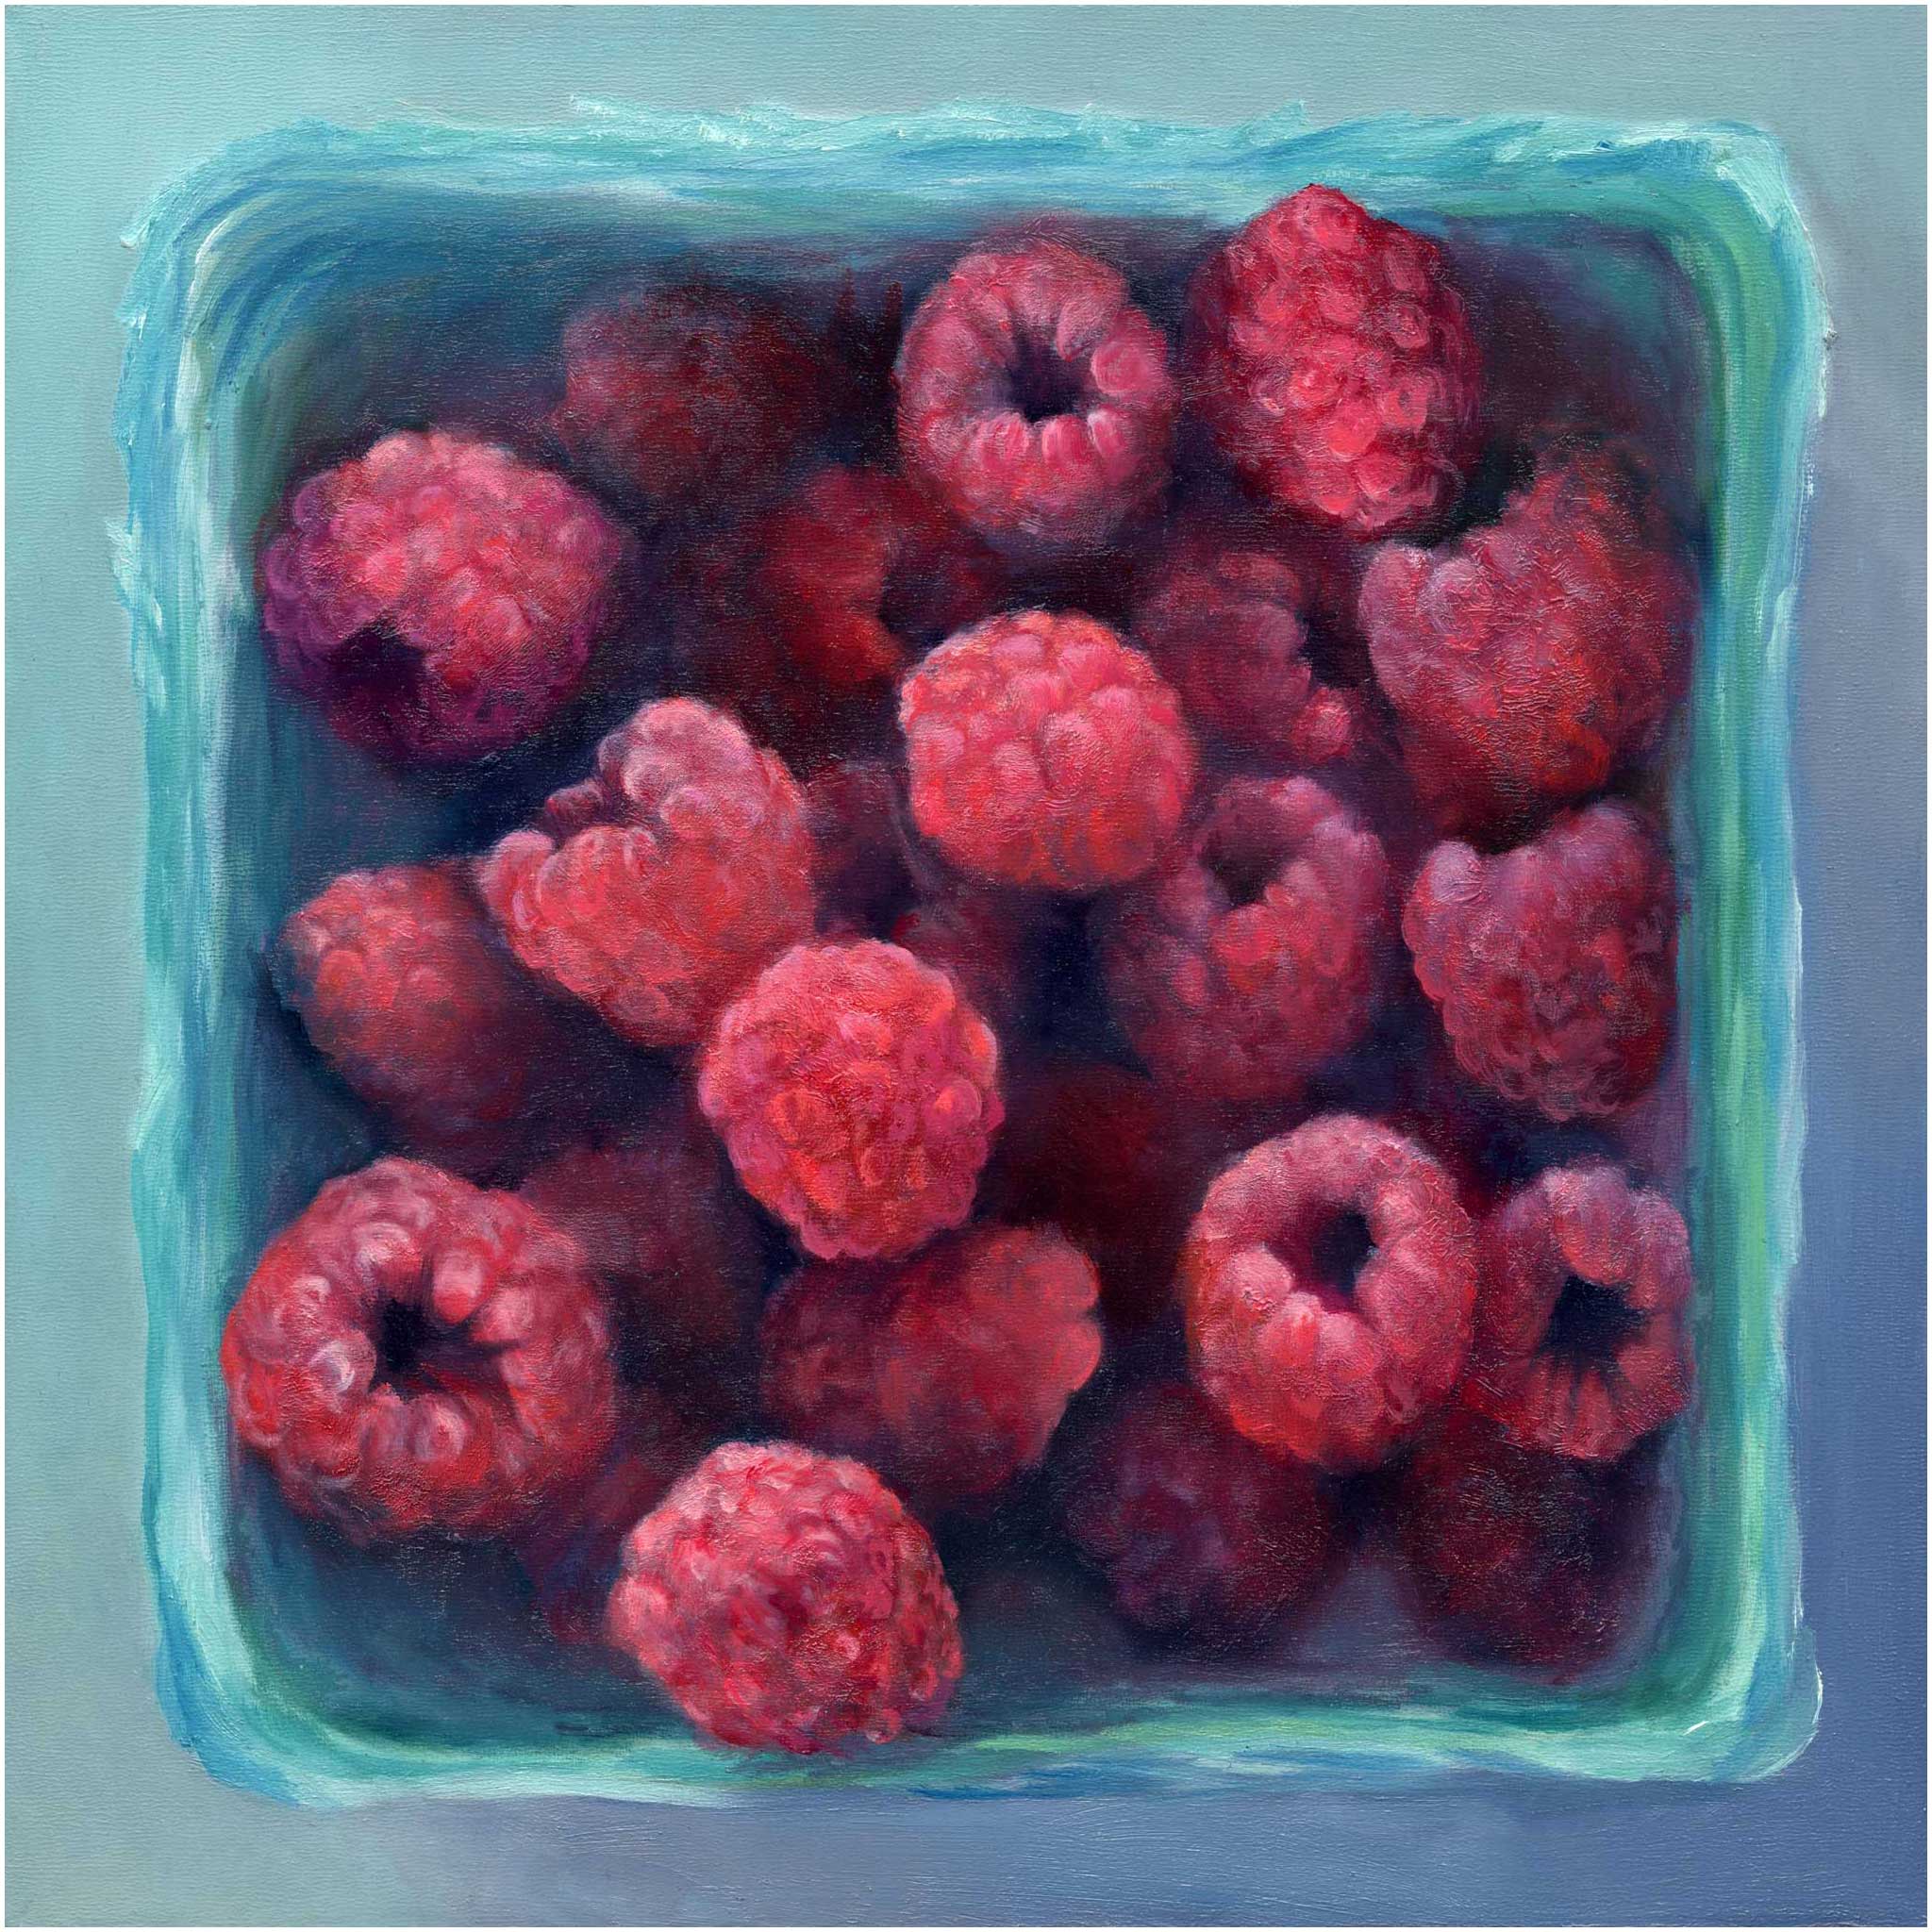 Soft pink raspberries in a teal box, fresh from the farmers market. This is a giclee art print from my original fruit still life oil painting, by Jo Bradney